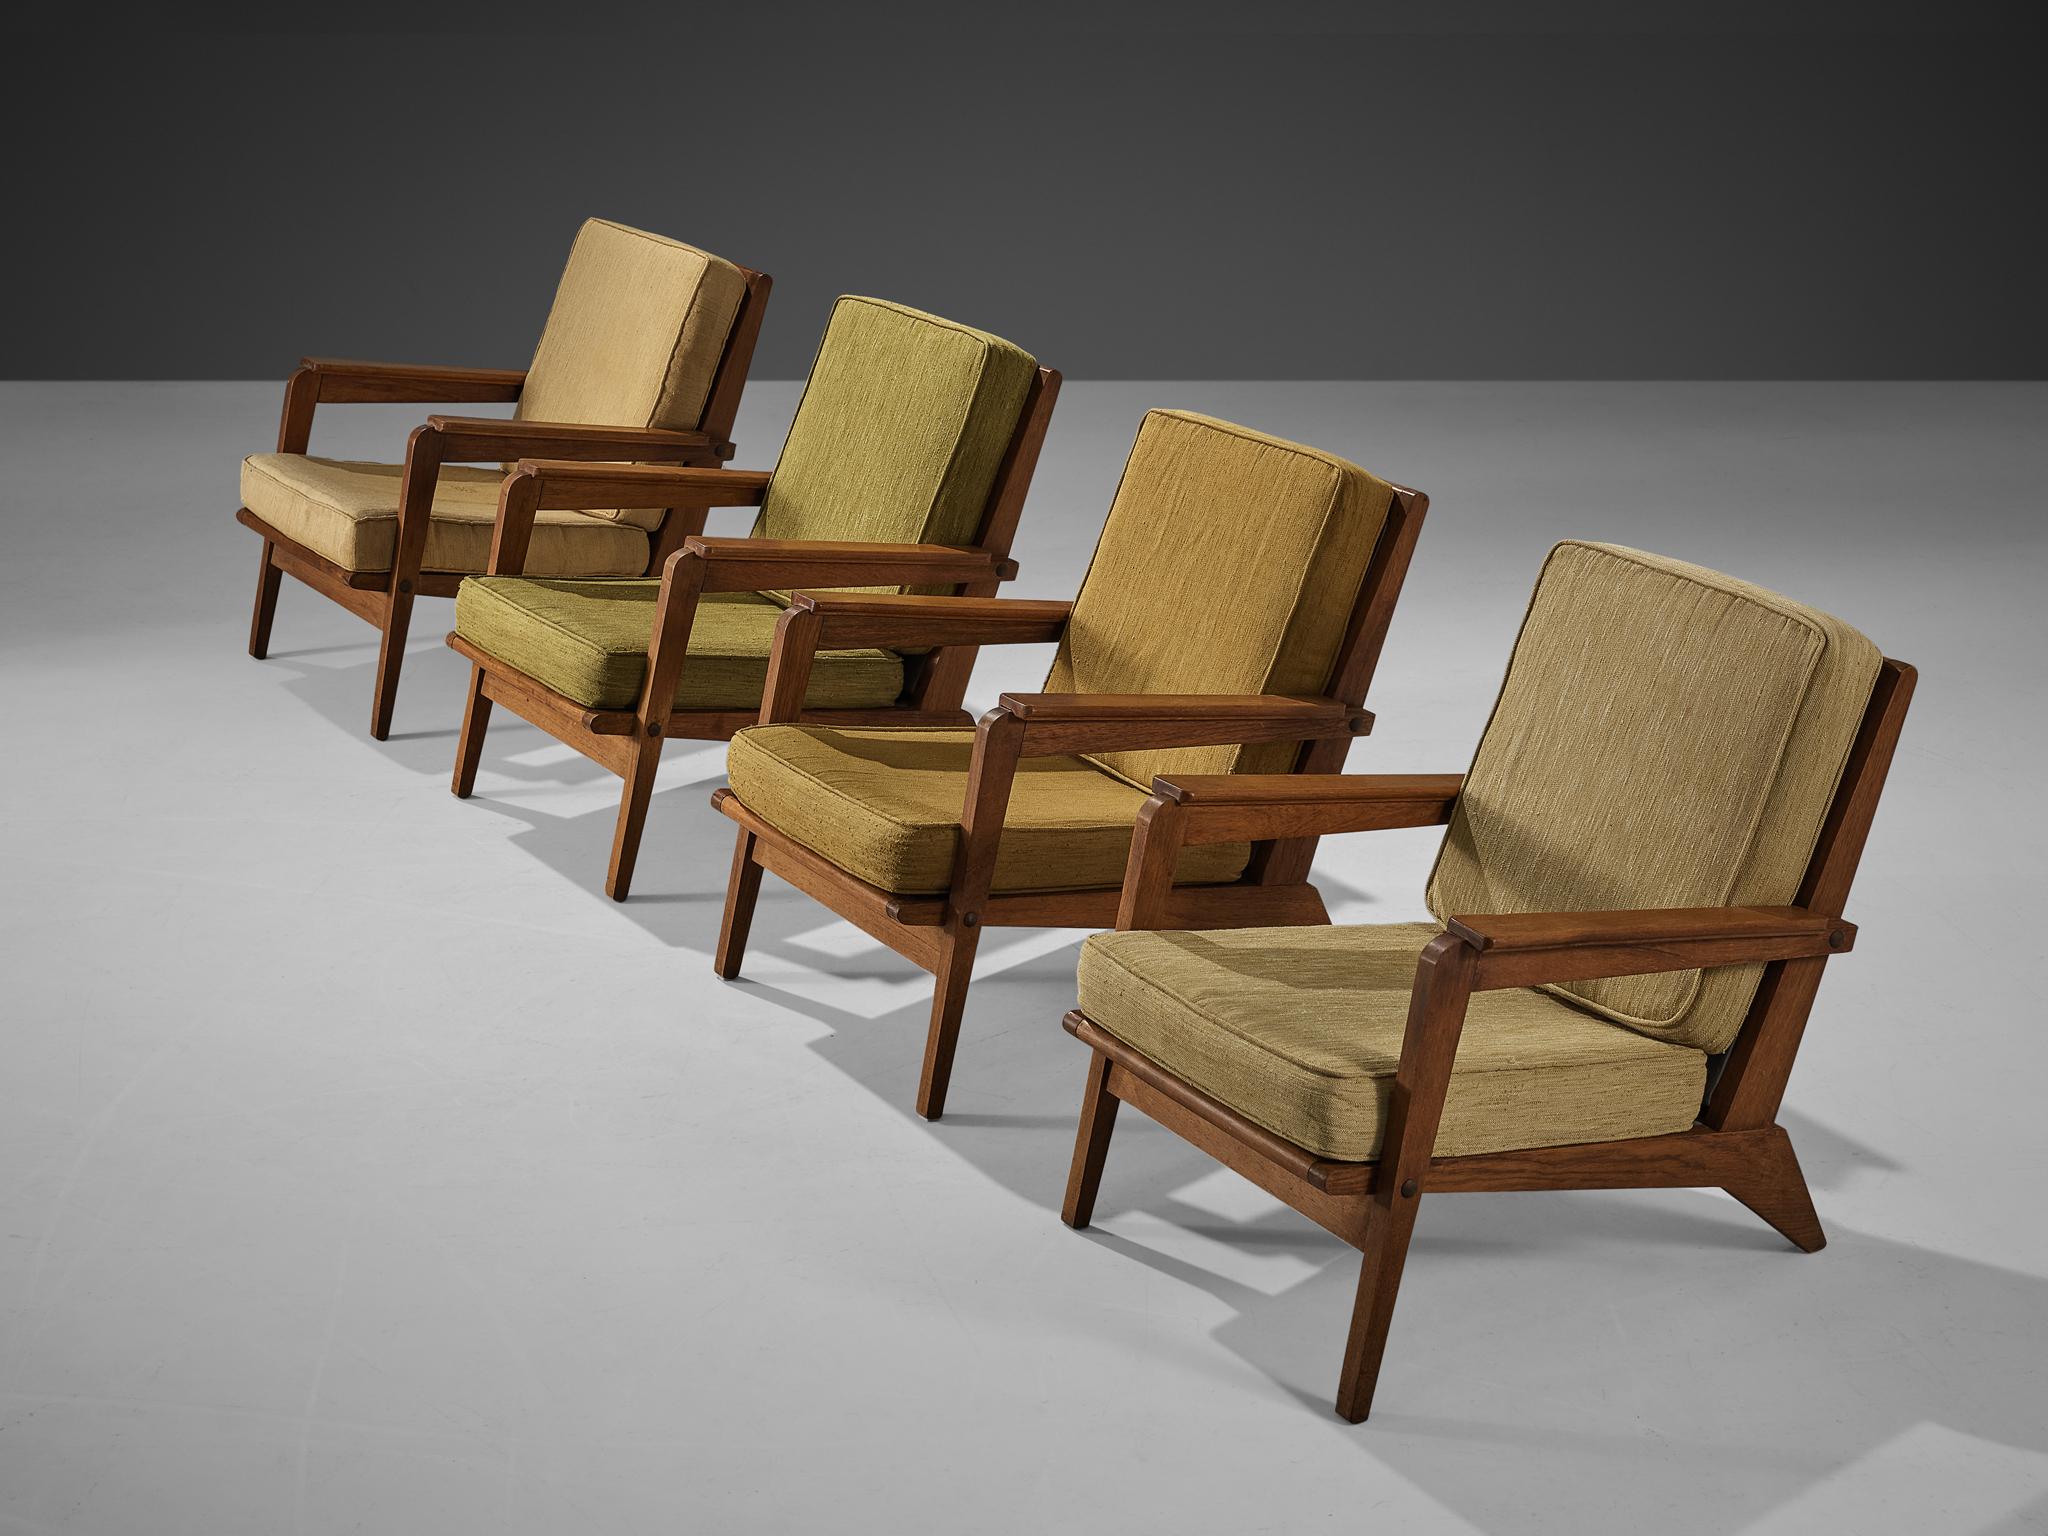 Set of four lounge chairs, fabric, wood, France, 1940s. 

These armchairs strongly remind of the iconic chairs created by the talented French designer René Gabriel (1899-1950), who is known for his constructivist approach to furniture design. The